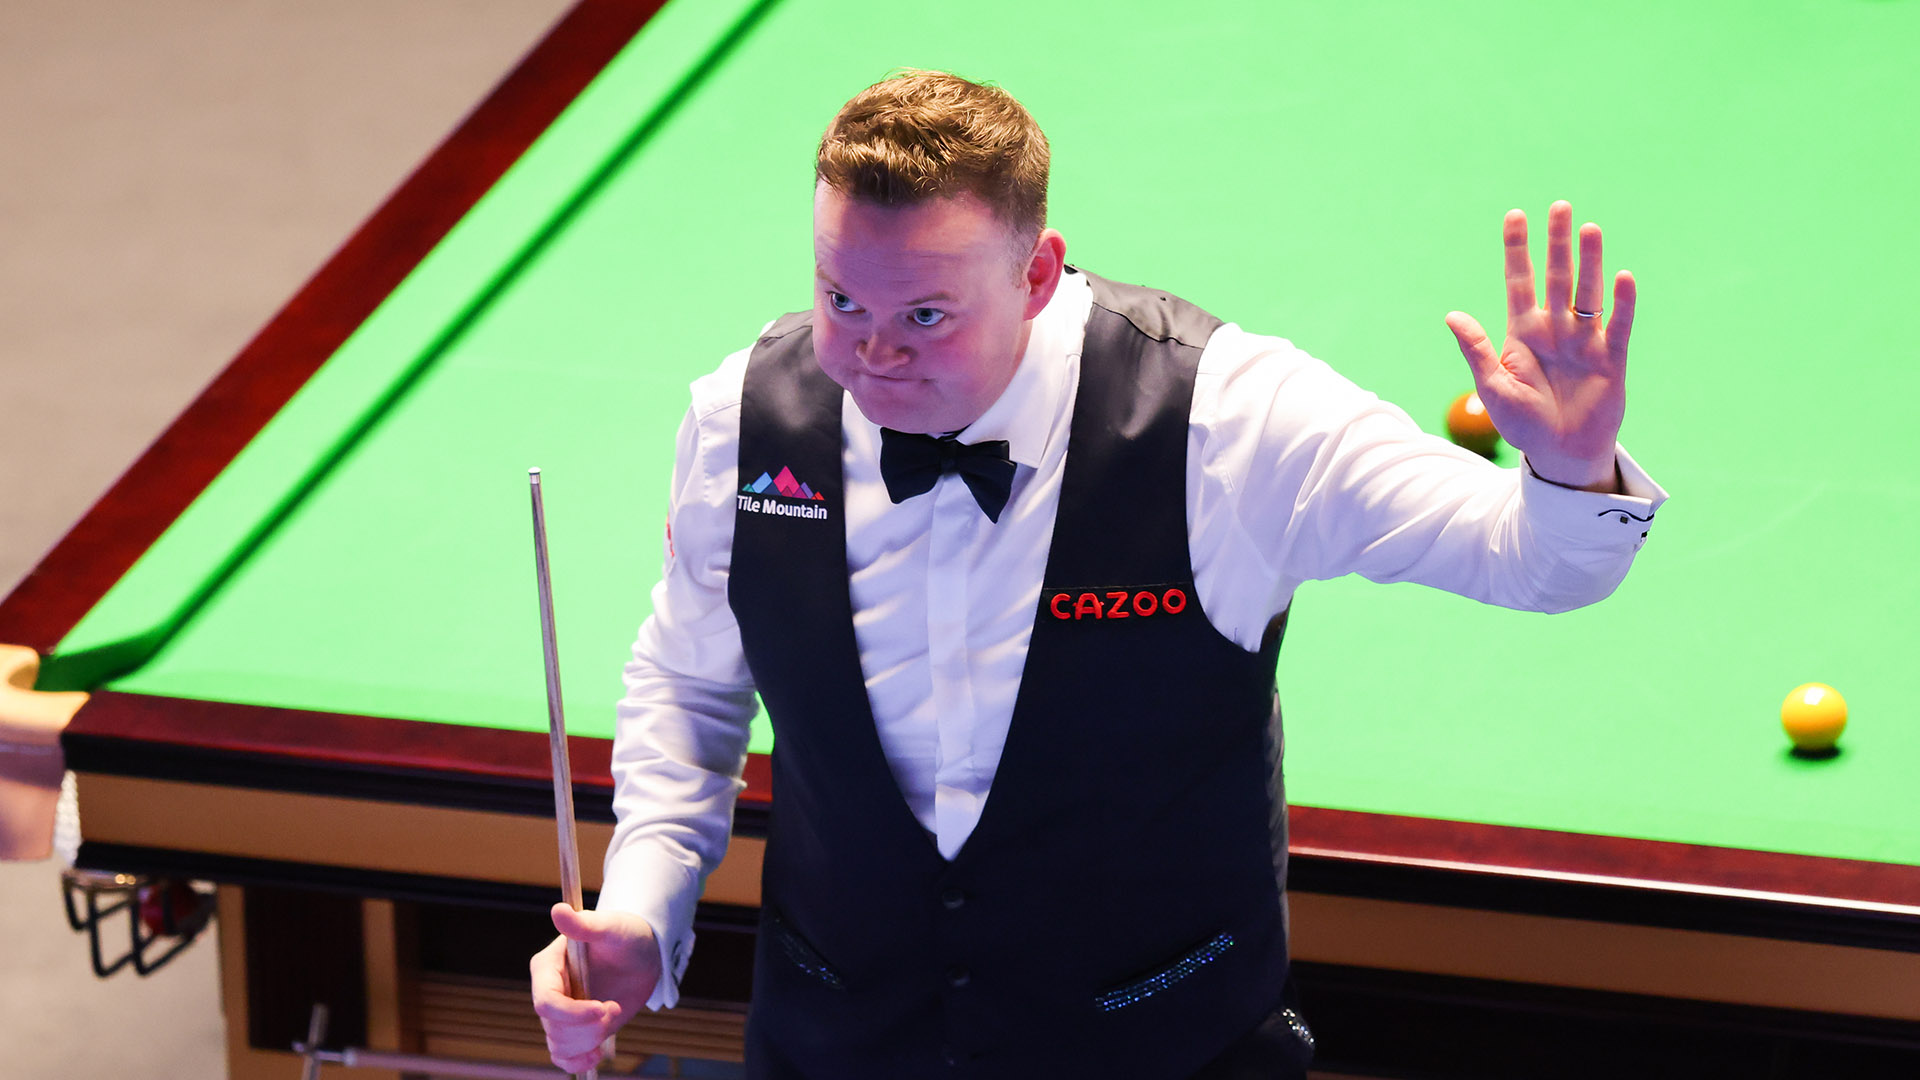 Snooker results Shaun Murphy overcomes injury to stun Judd Trump at UK Championship as Ding Junhui sets up clash with Ronnie OSullivan